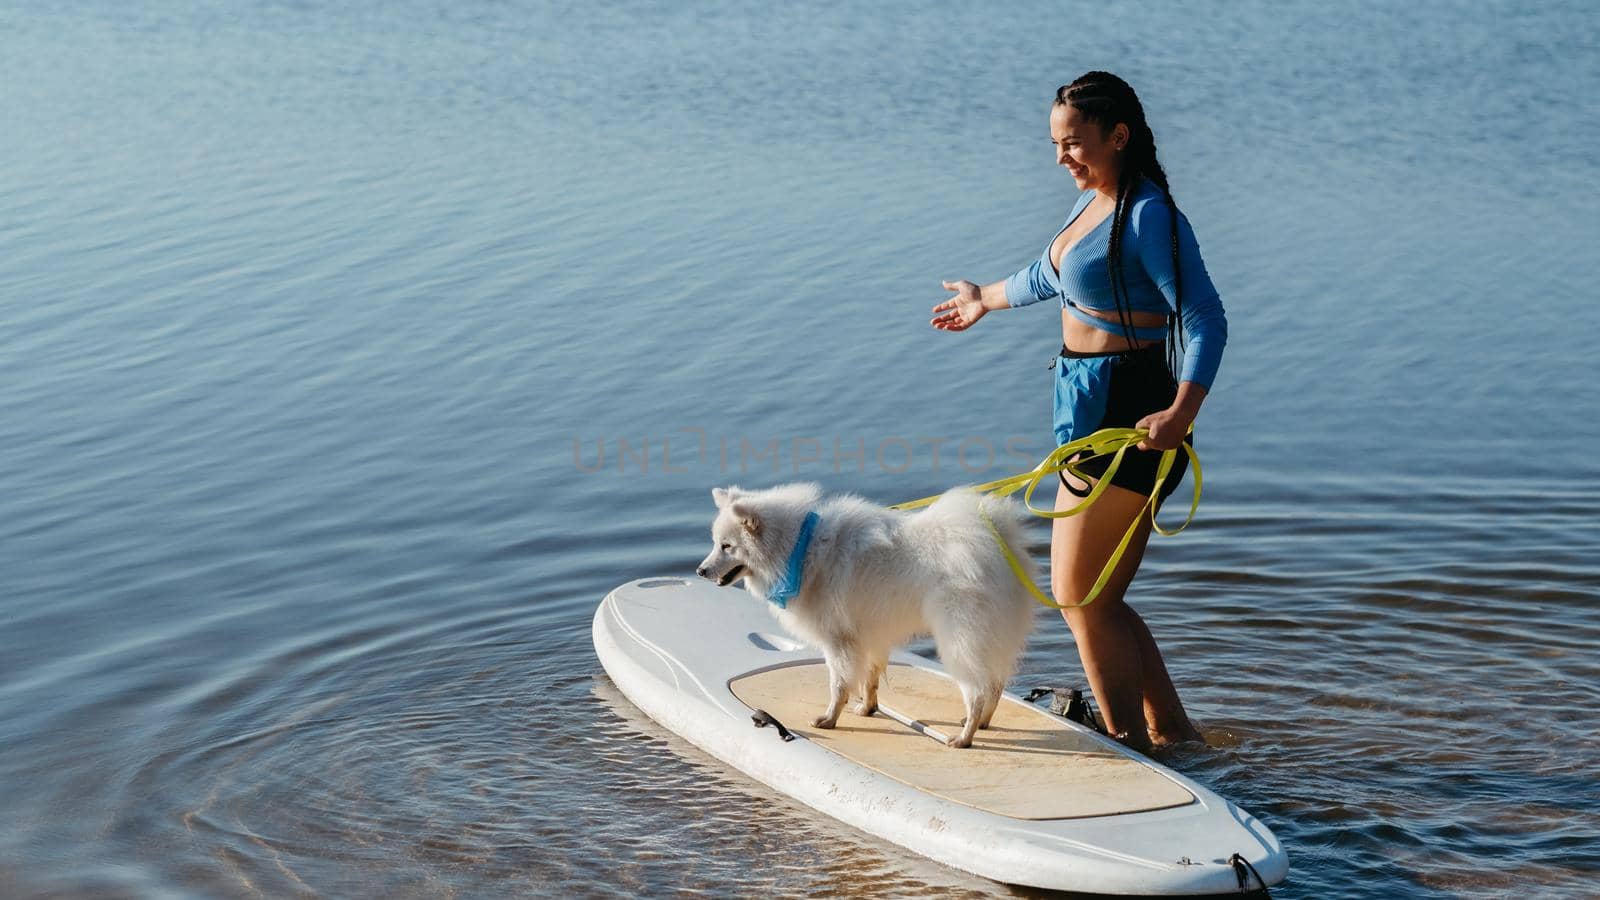 Woman Preparing to Paddleboarding with Her Dog Japanese Spitz Sitting on Sup Board on the Lake by Romvy